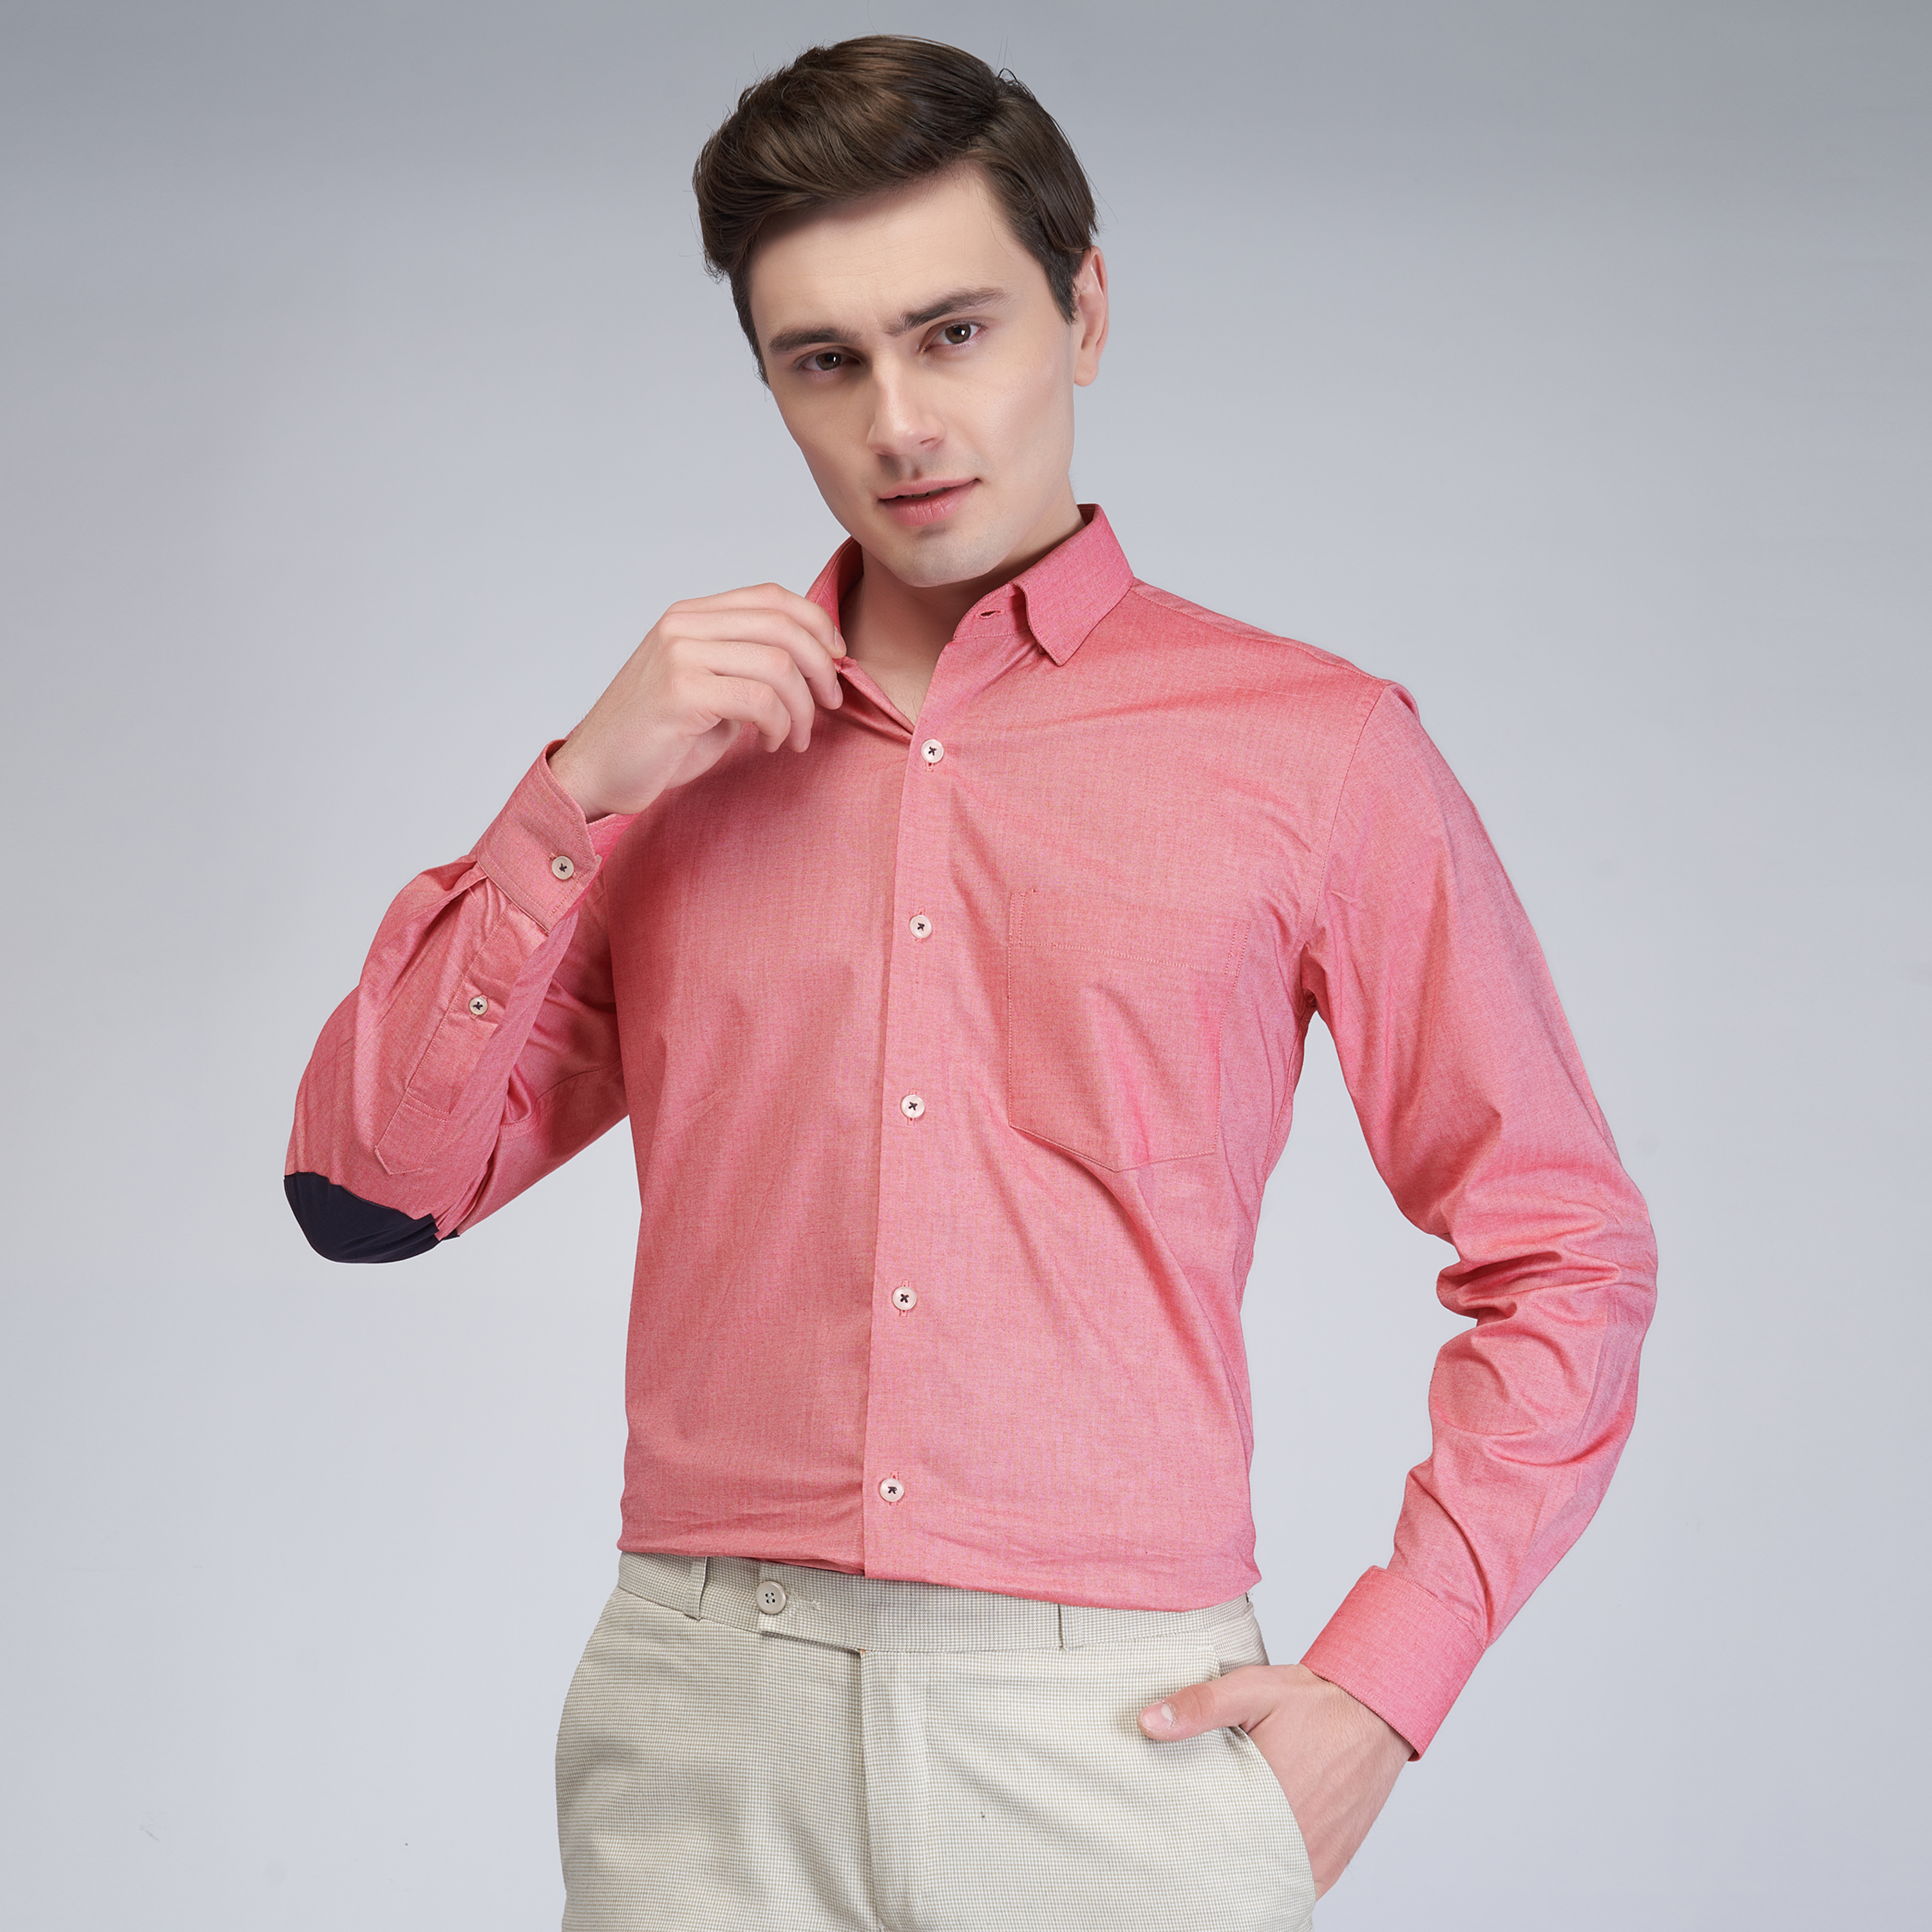 Solid Shirts for Men